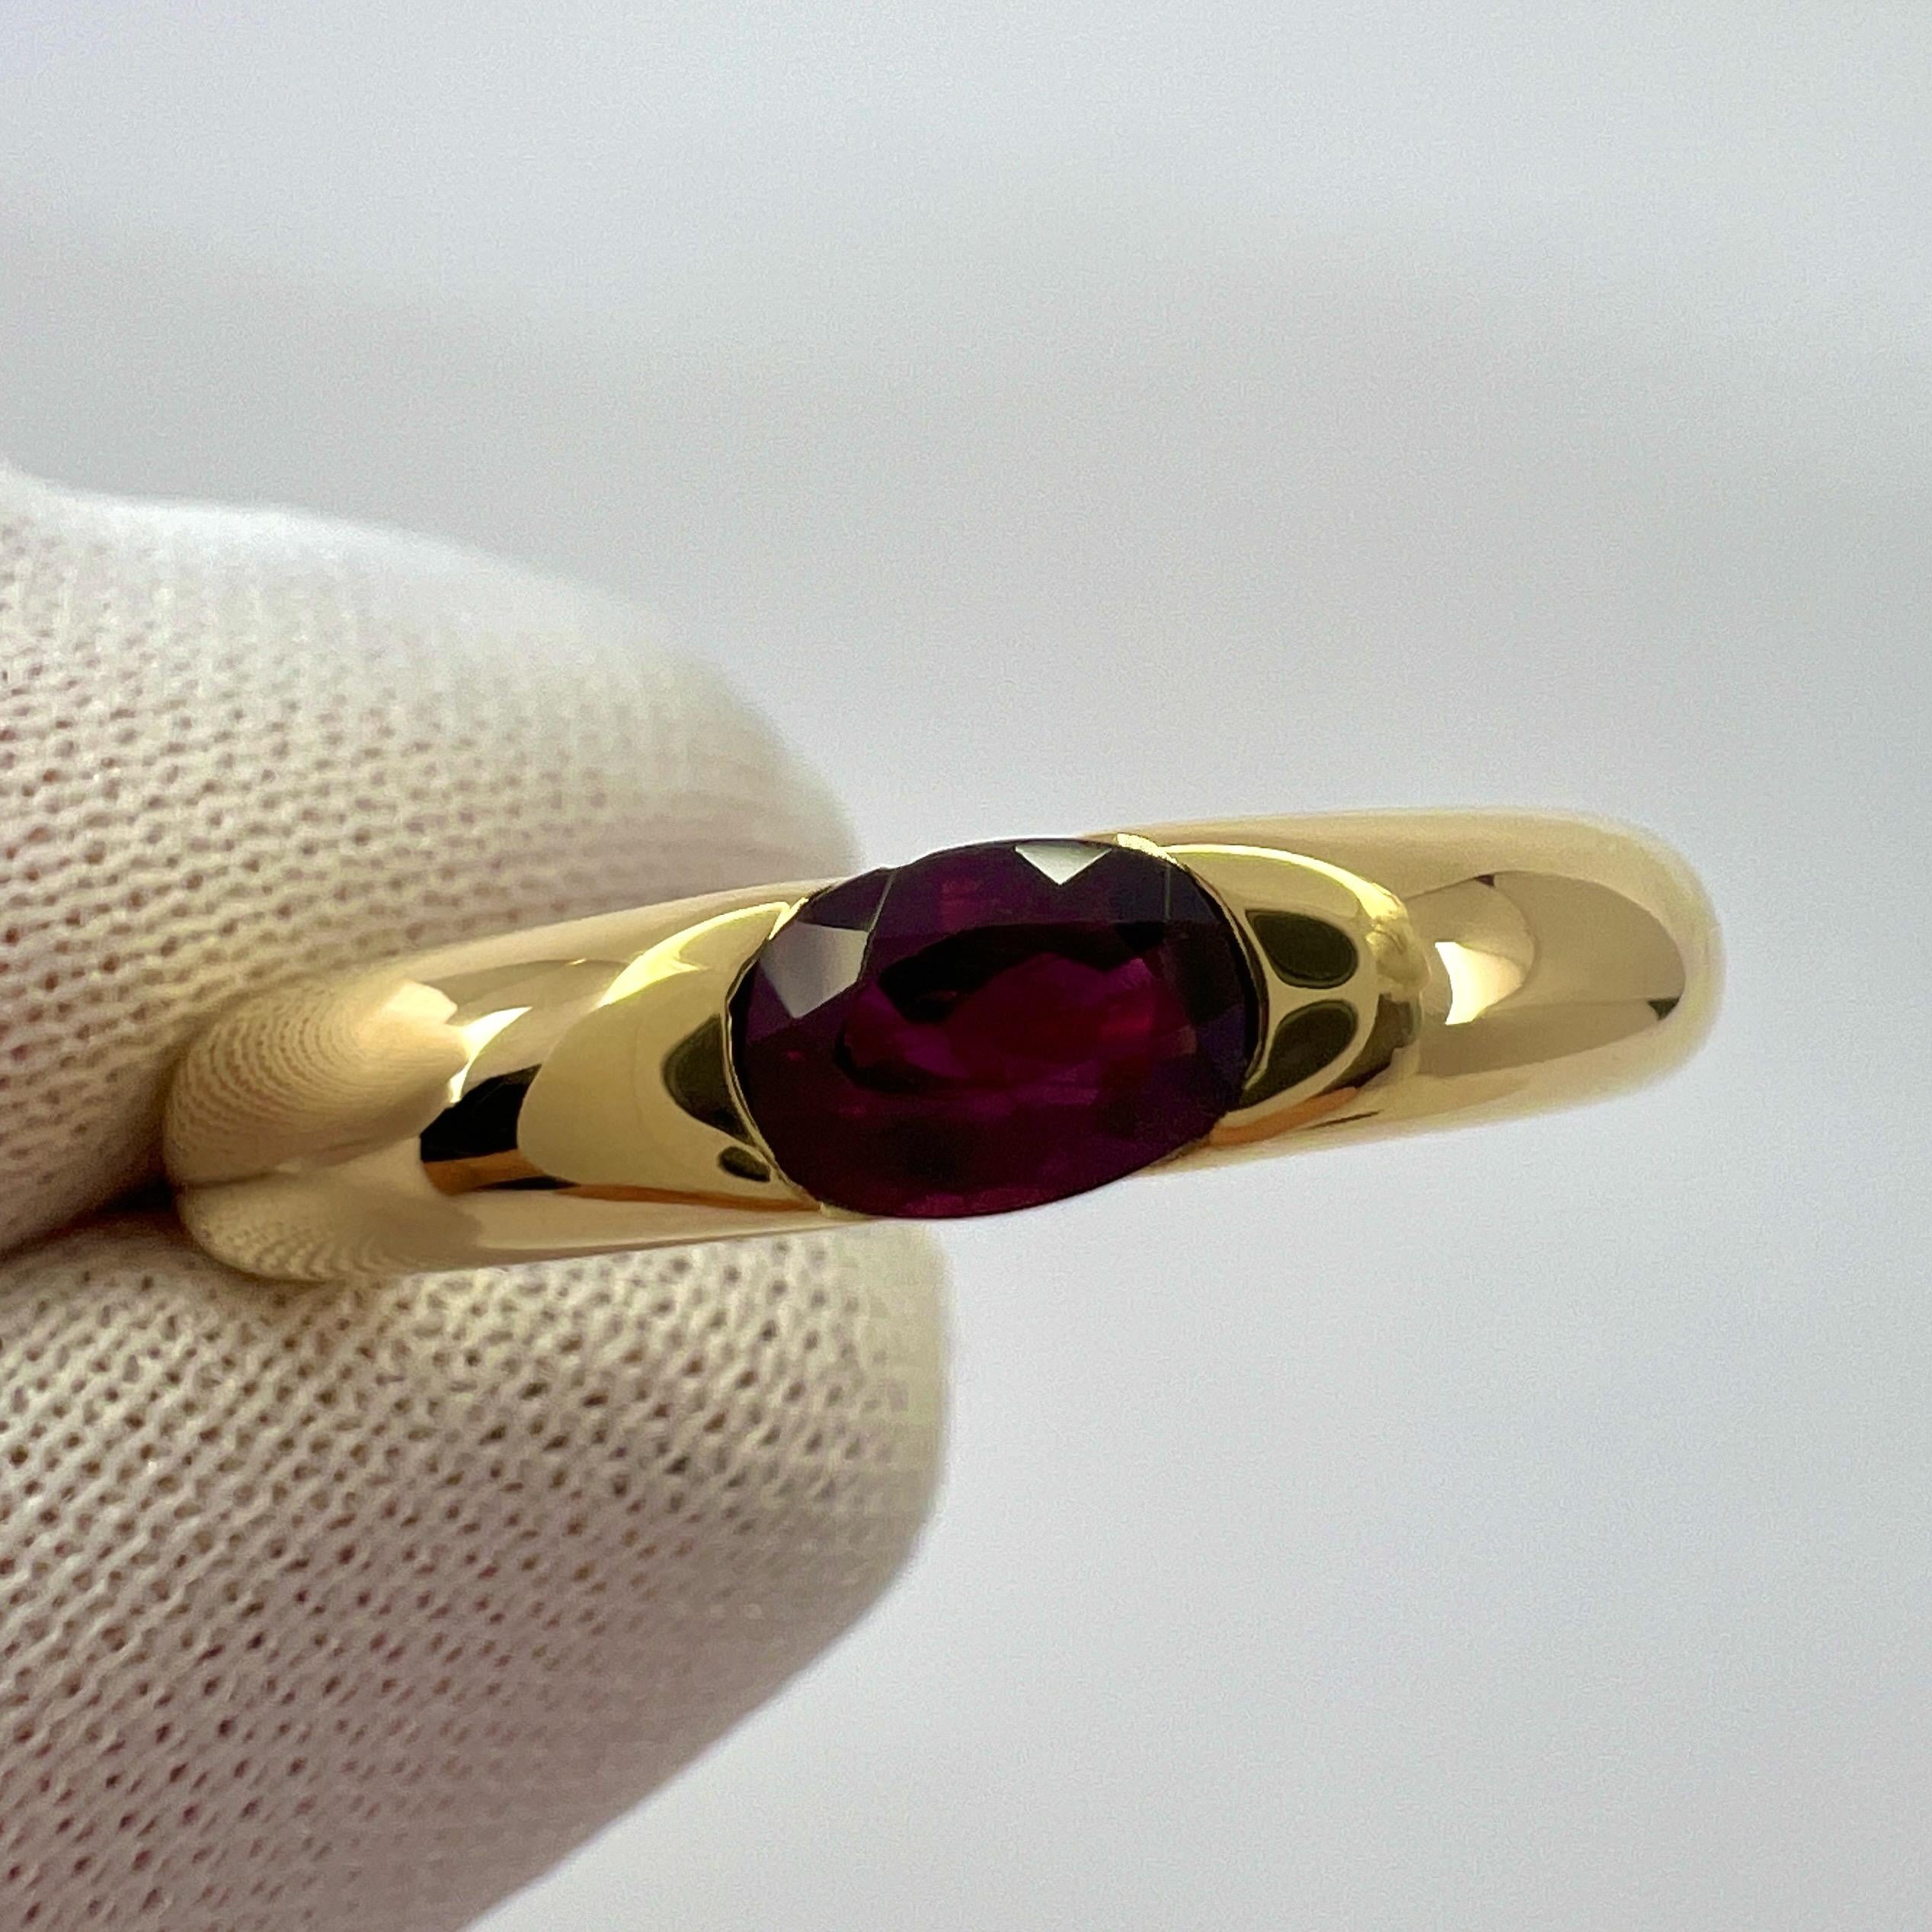 Vintage Cartier Deep Red Ruby Ellipse 18k Yellow Gold Oval Solitaire Ring 50 US5 4